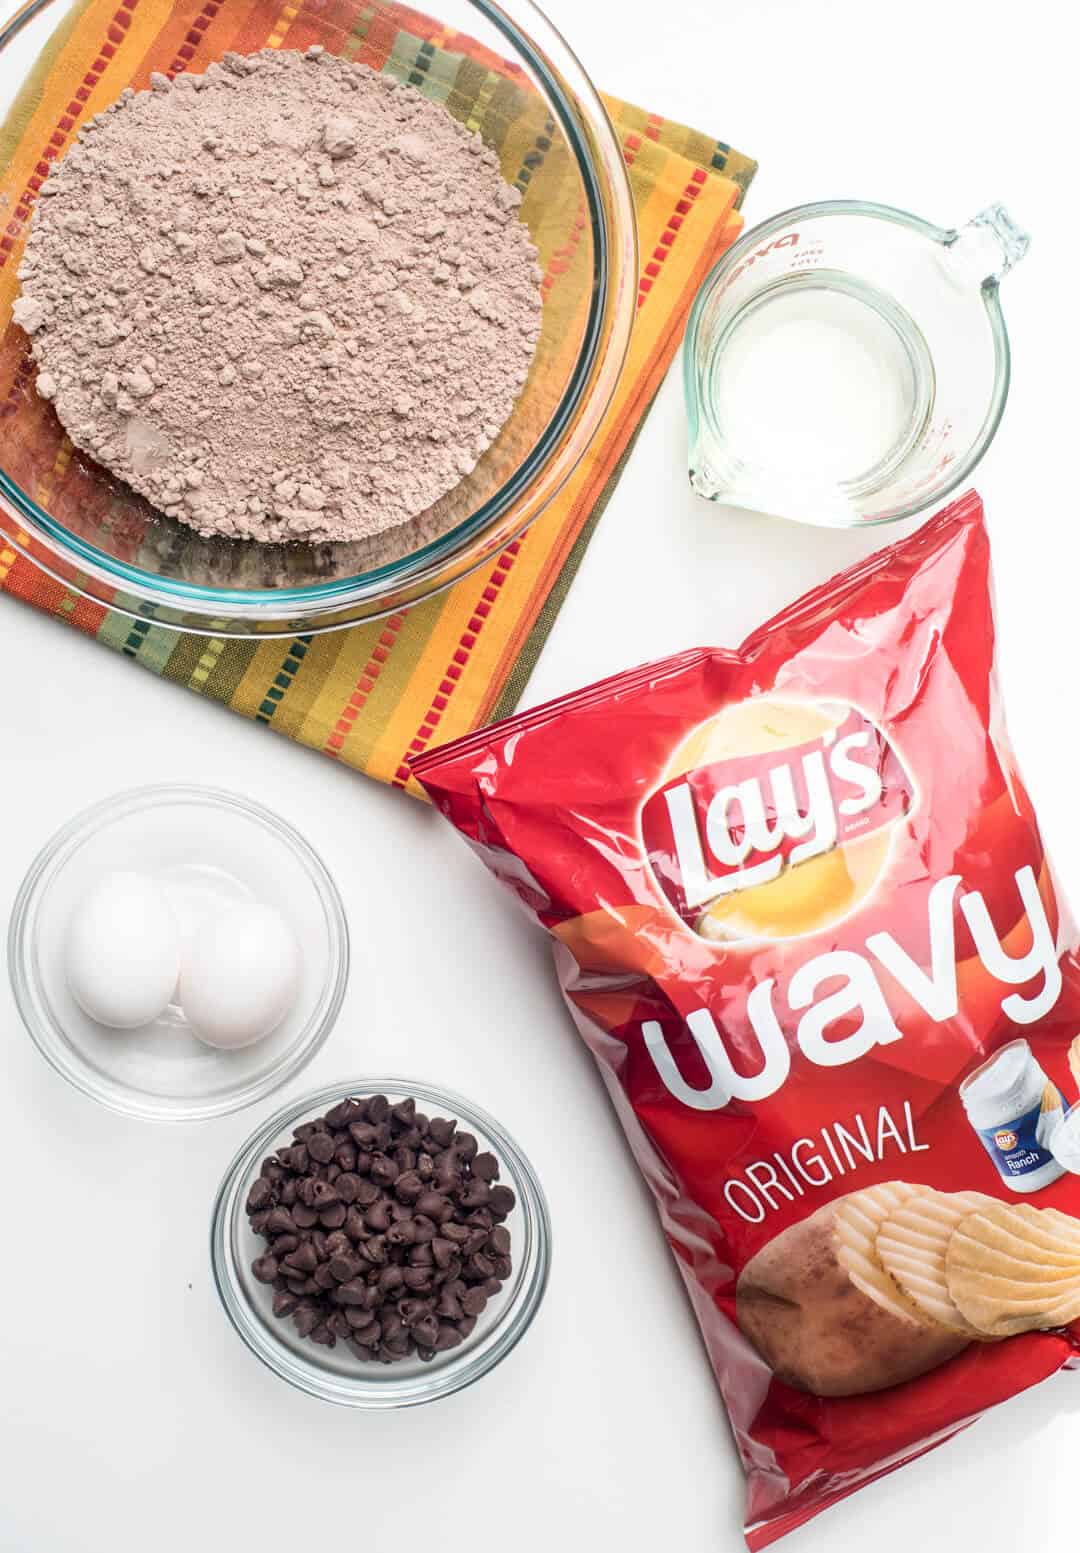 Boxed brownie mix in a bowl, a bag of Wavy Lay's Potato Chips and other ingredient on a white surface.